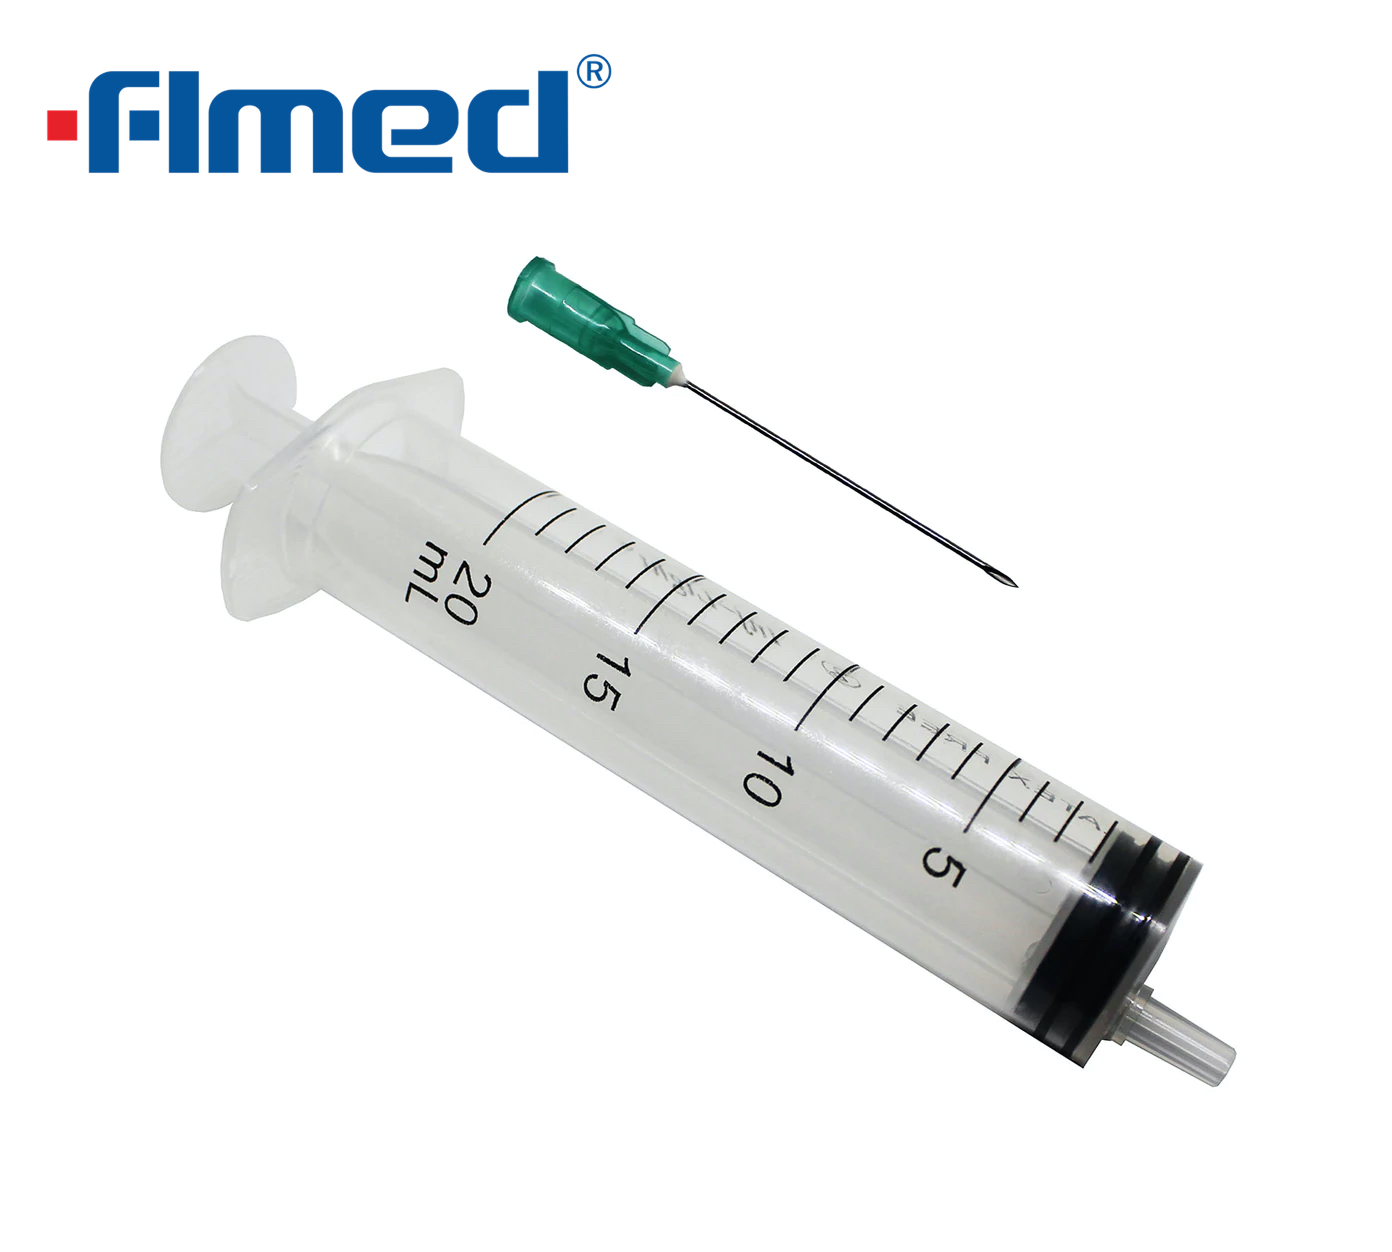 Disposable Medical Syringe 20ml Syringe With 21G Hypodermic Needle Eccentric 1, 1/2" inch